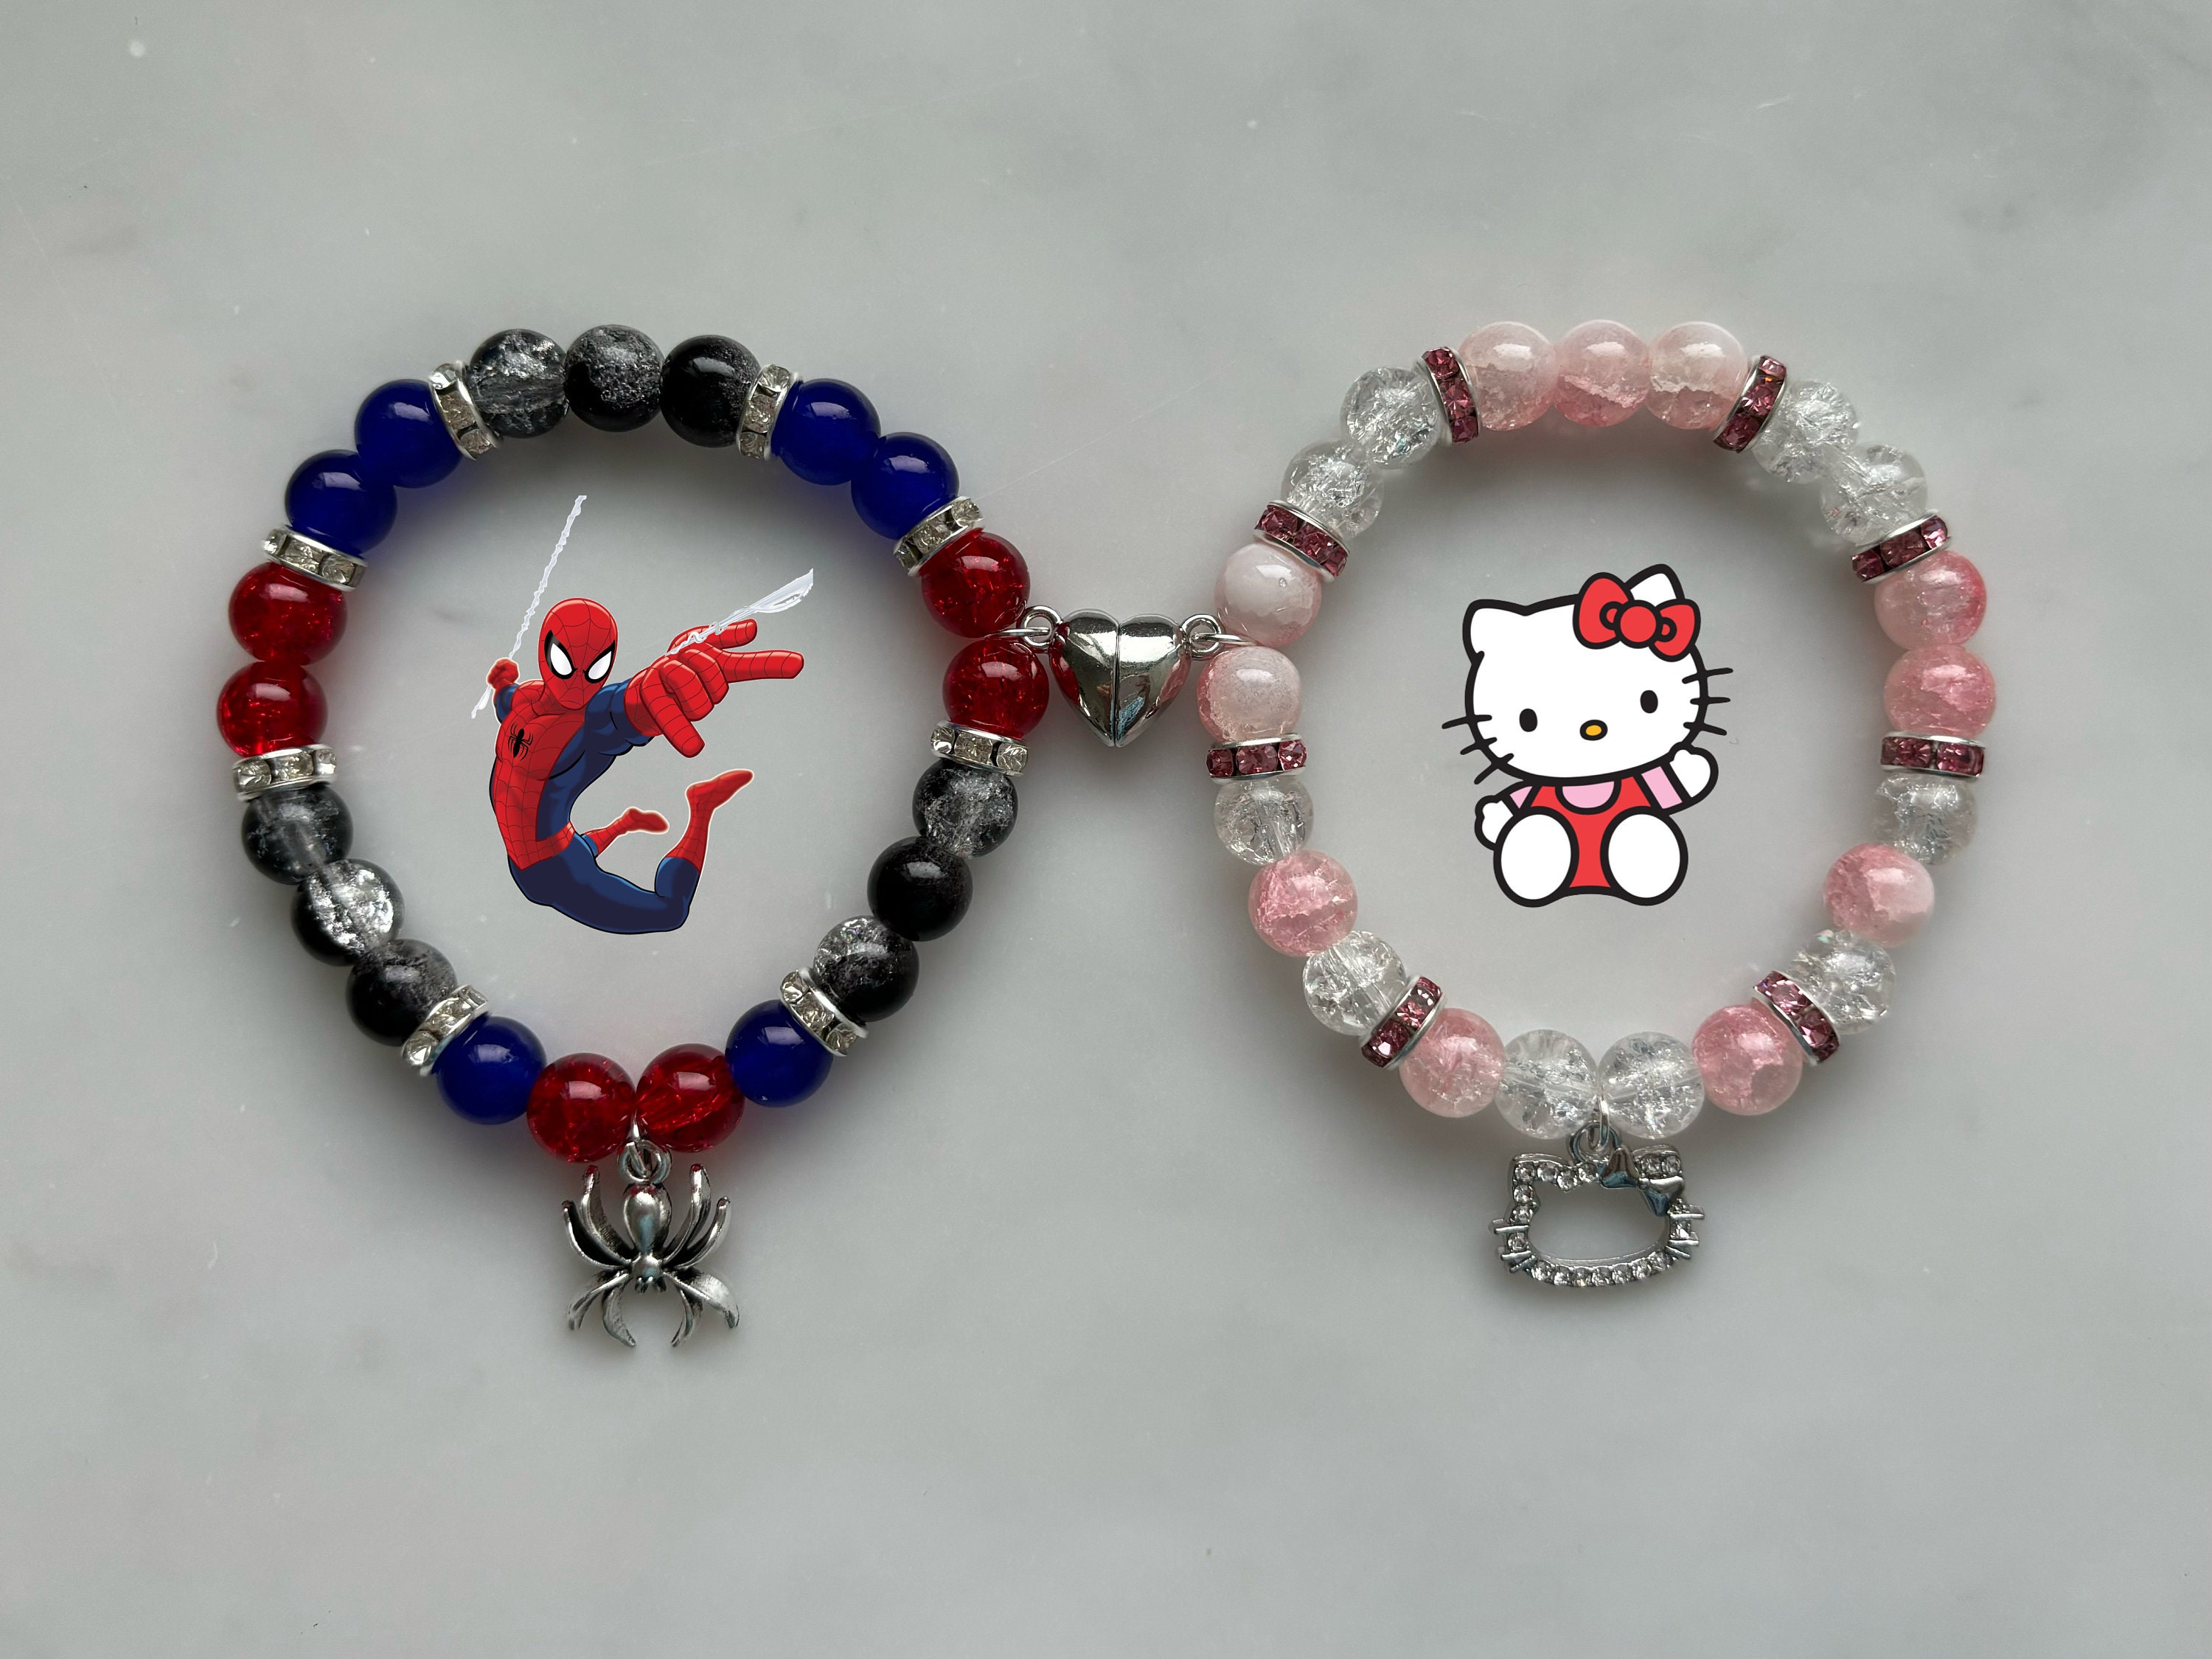 HELLO KITTY Carry Case With Beads Bracelet Maker Price in India